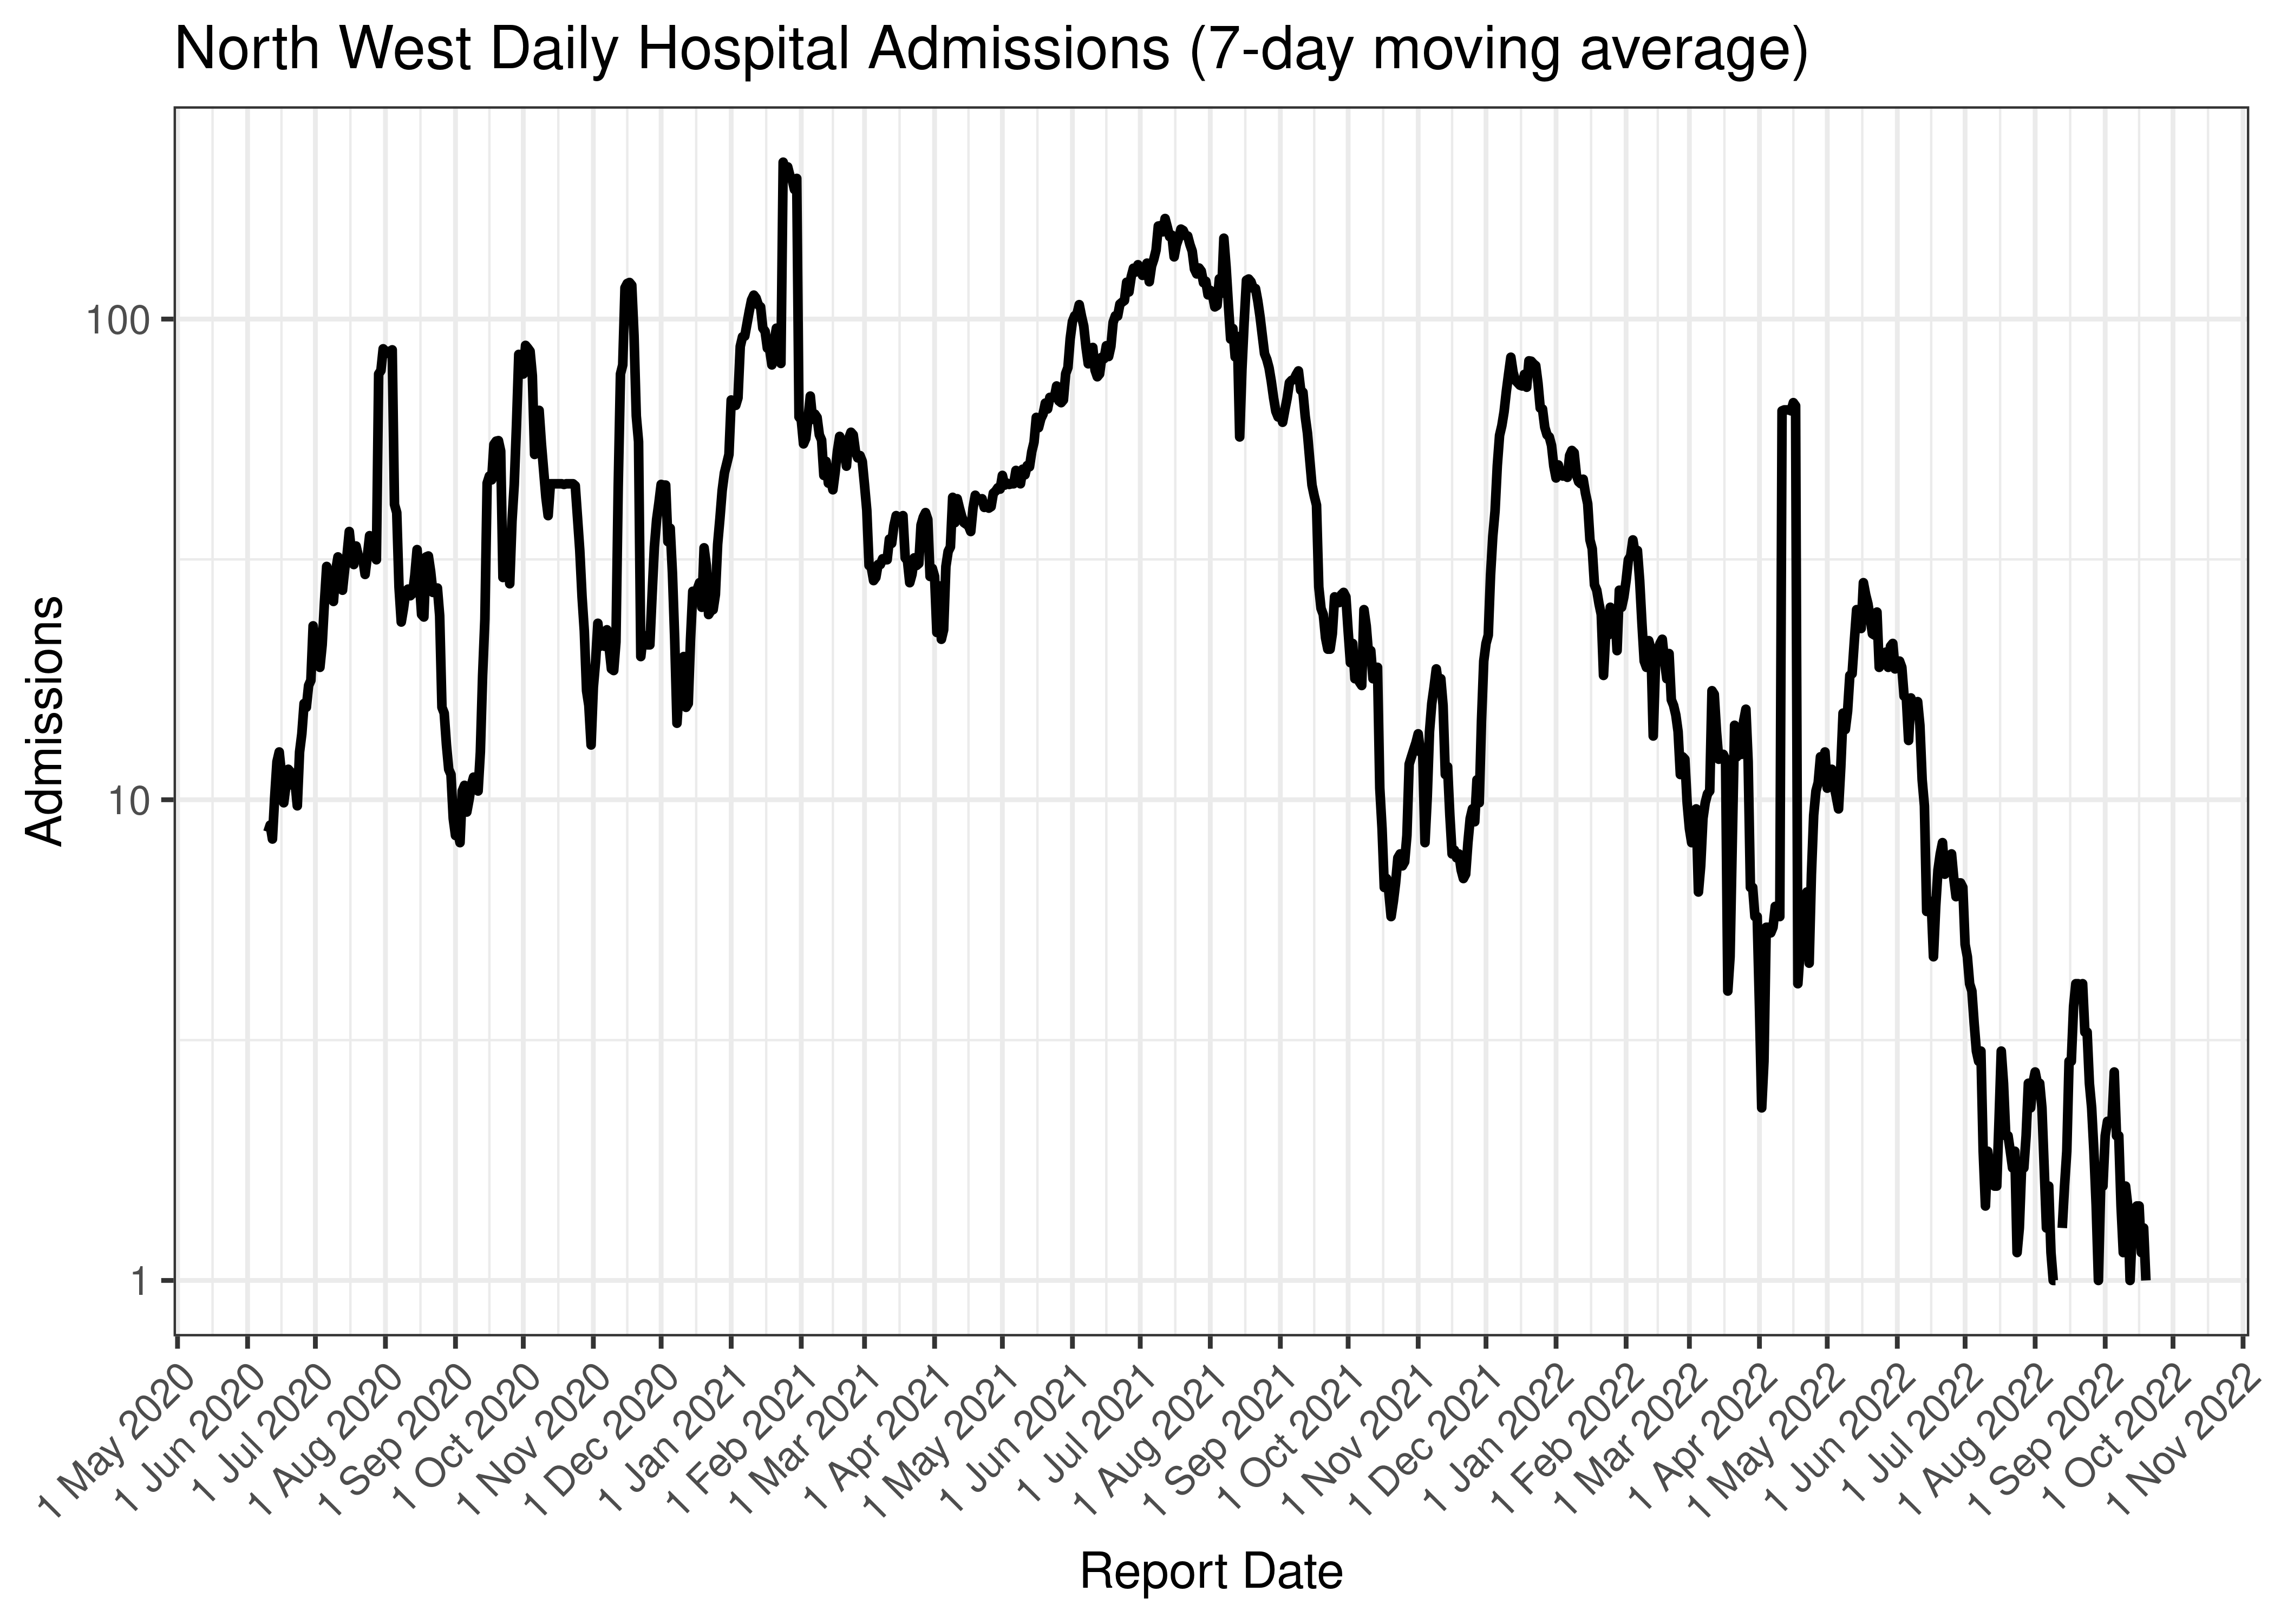 North West Daily Hospital Admissions (7-day moving average)